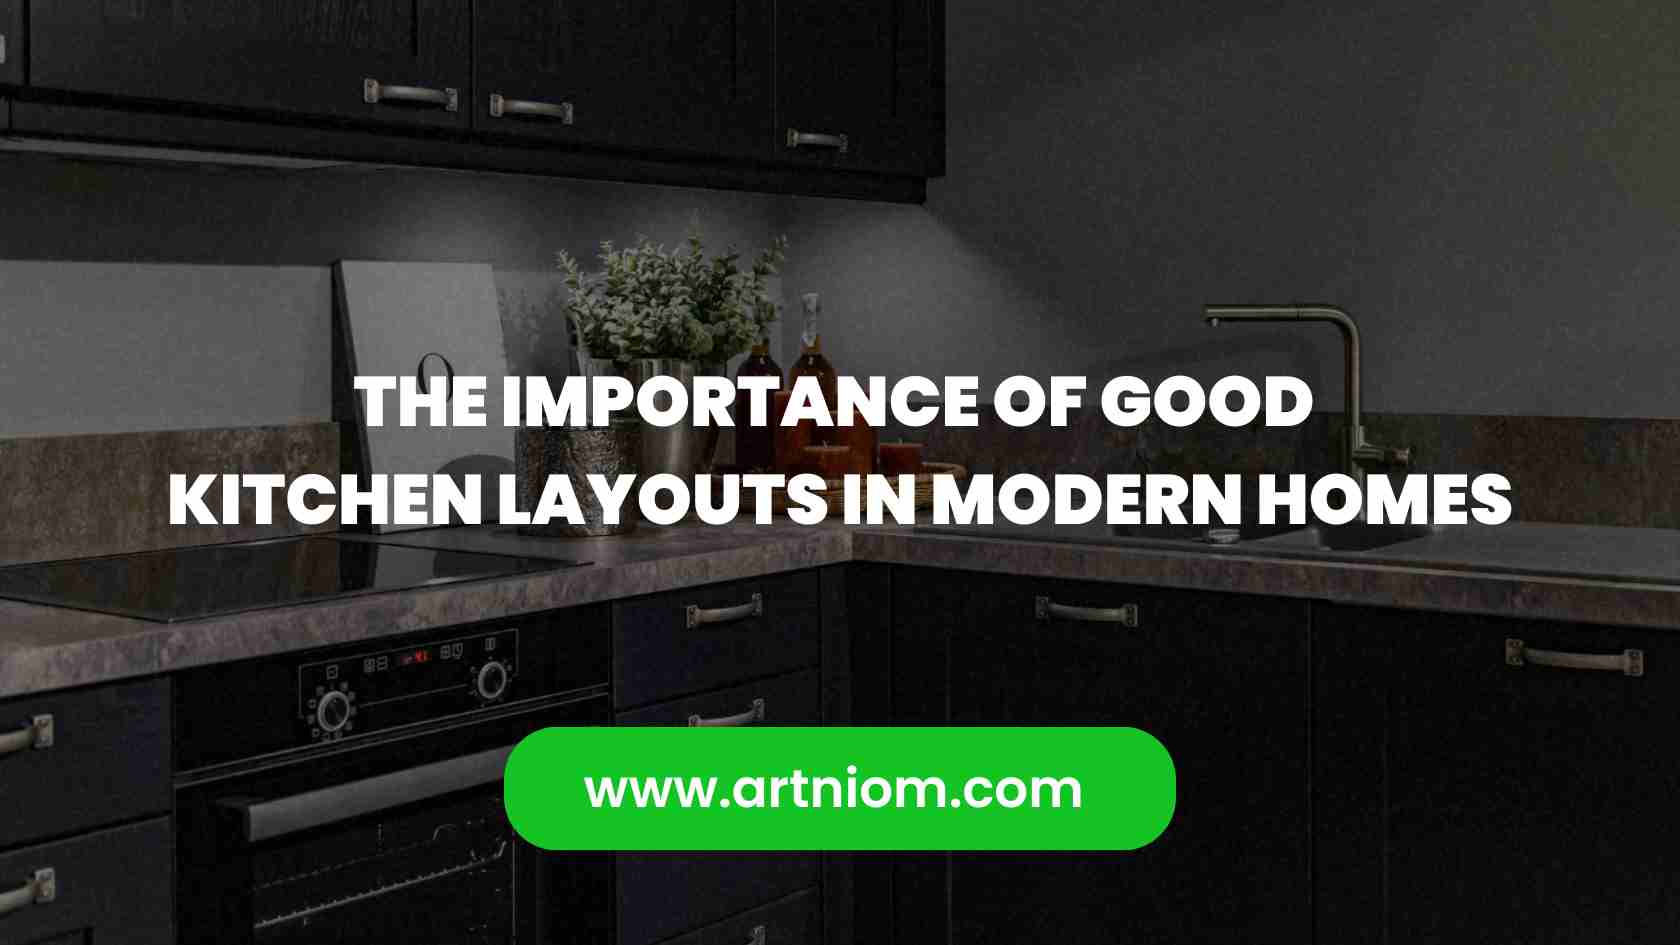 Read more about the article The Importance of Good Kitchen Layouts in Modern Homes